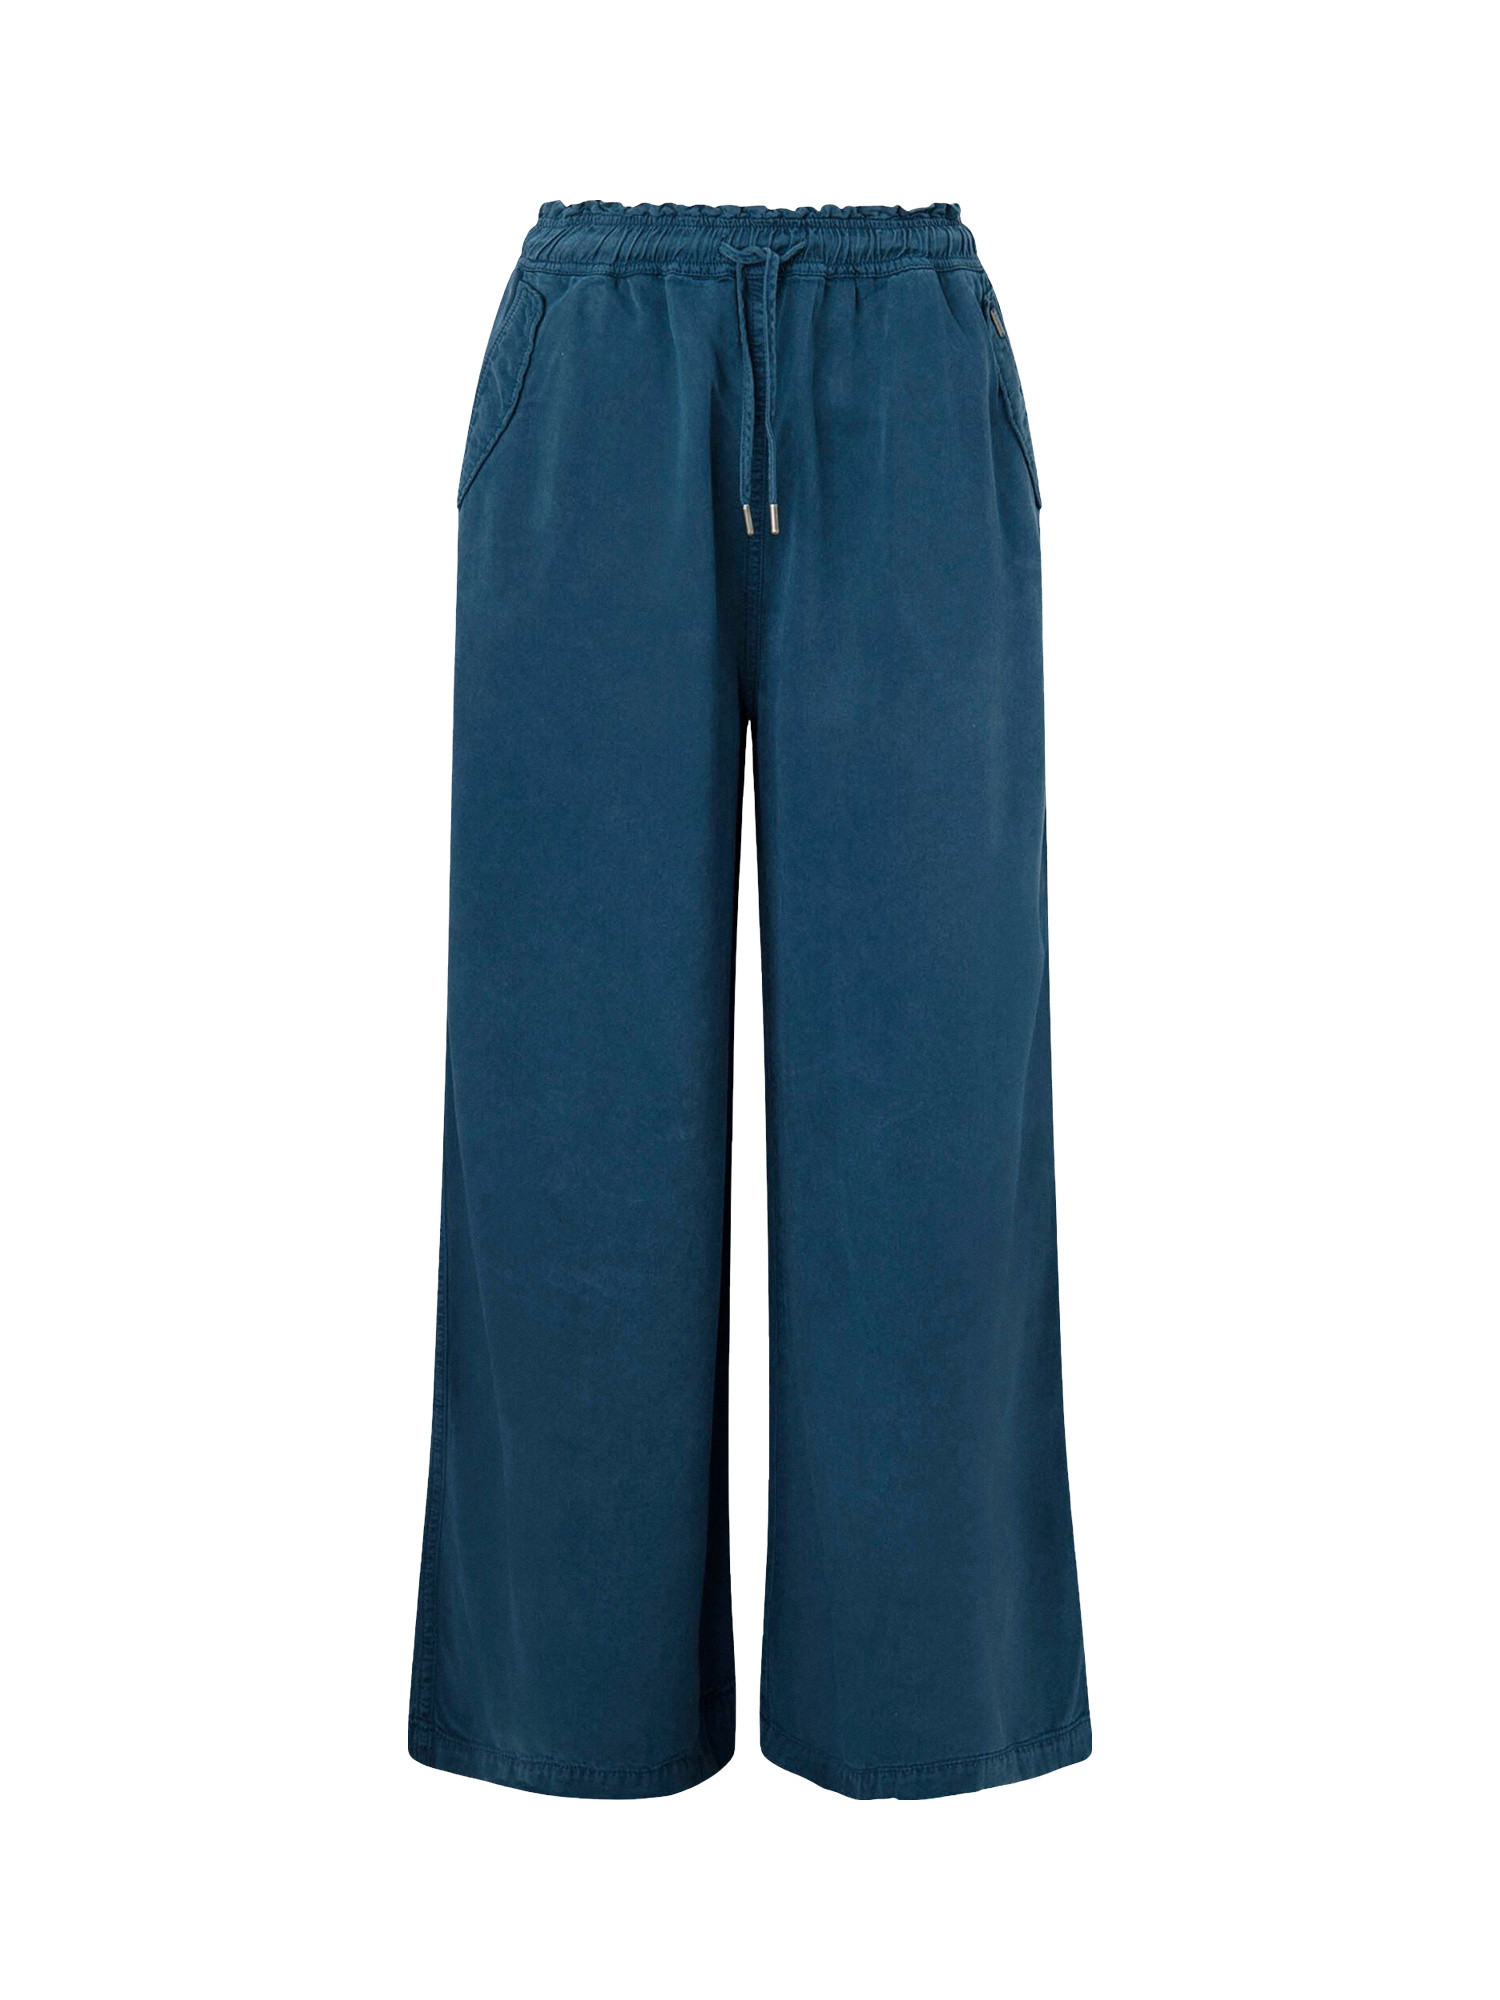 Pepe Jeans - High waisted trousers, Dark Blue, large image number 0